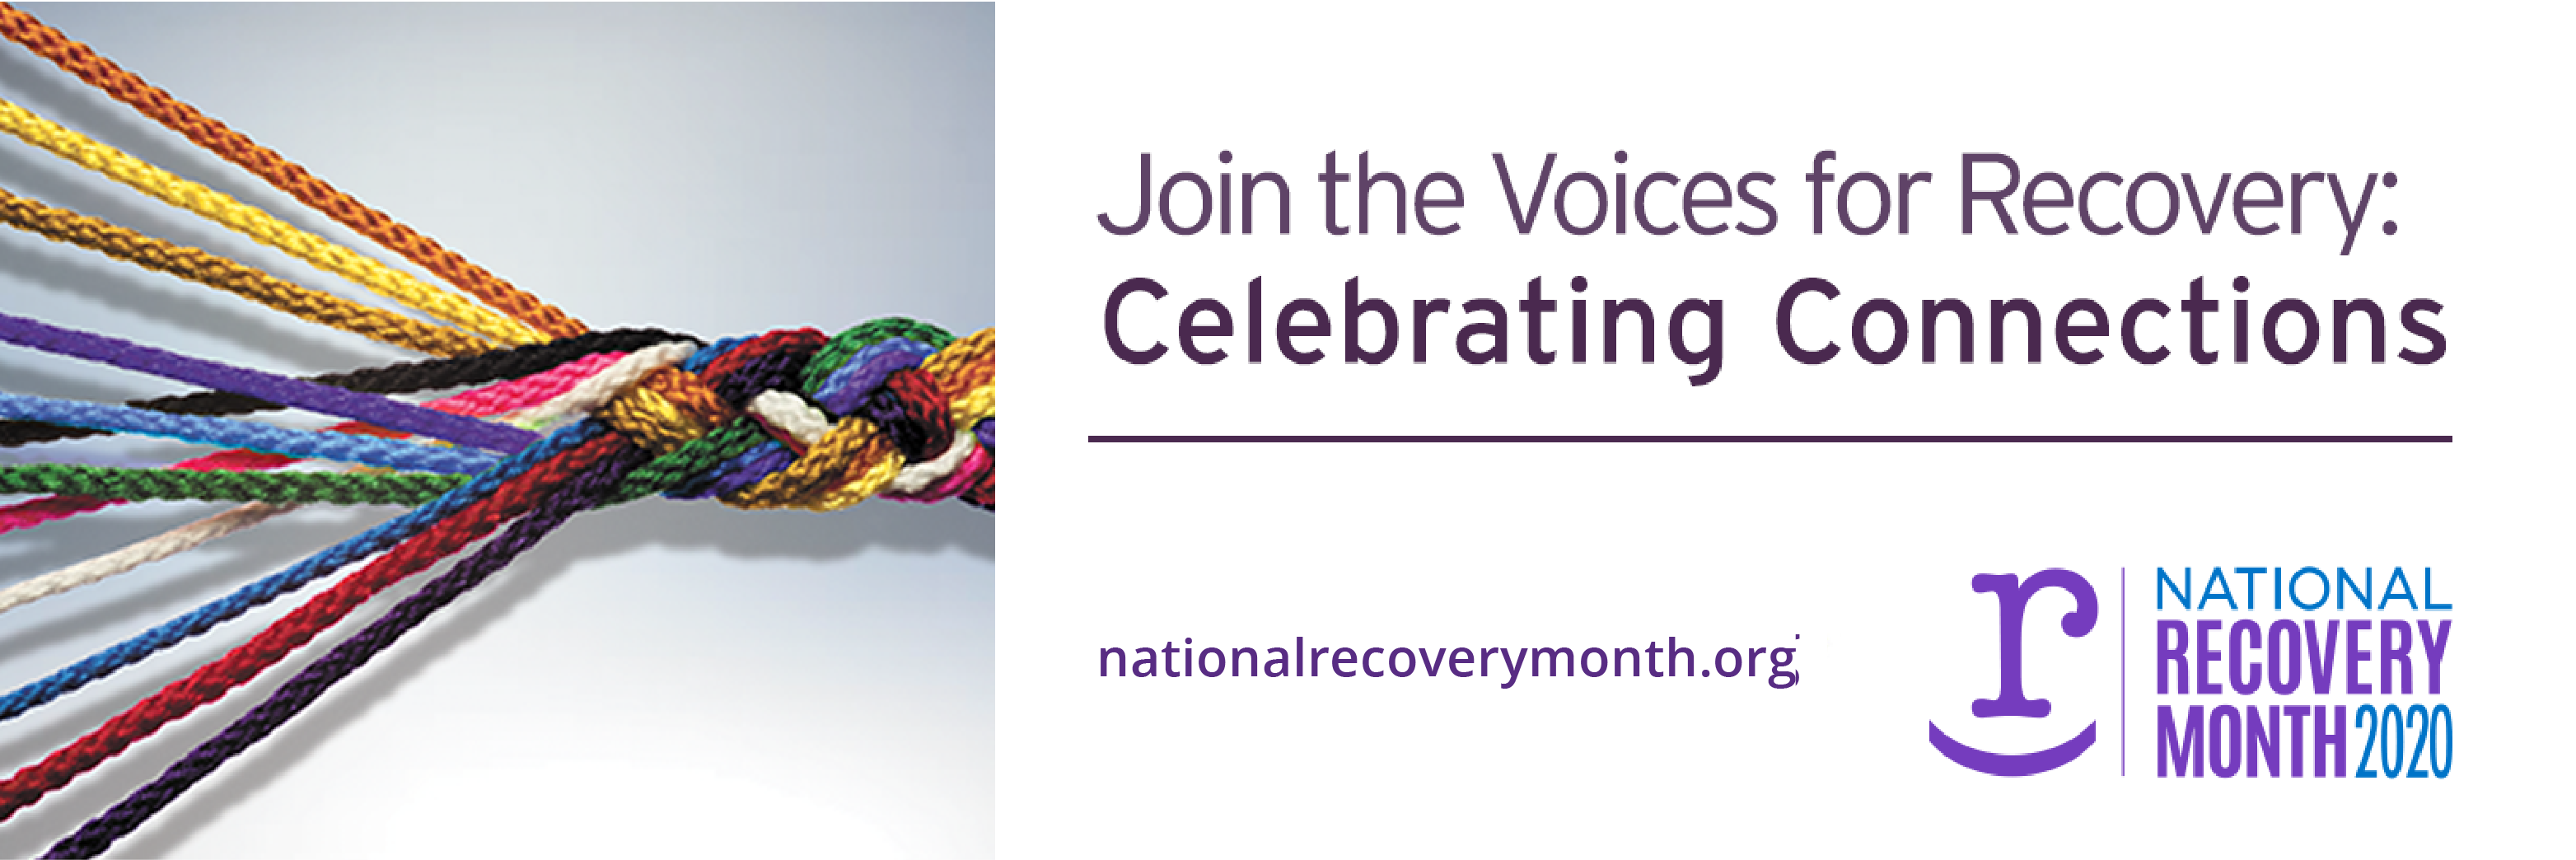 Join the Voices of Recovery. Celebrating Connections for Recovery Month 2020